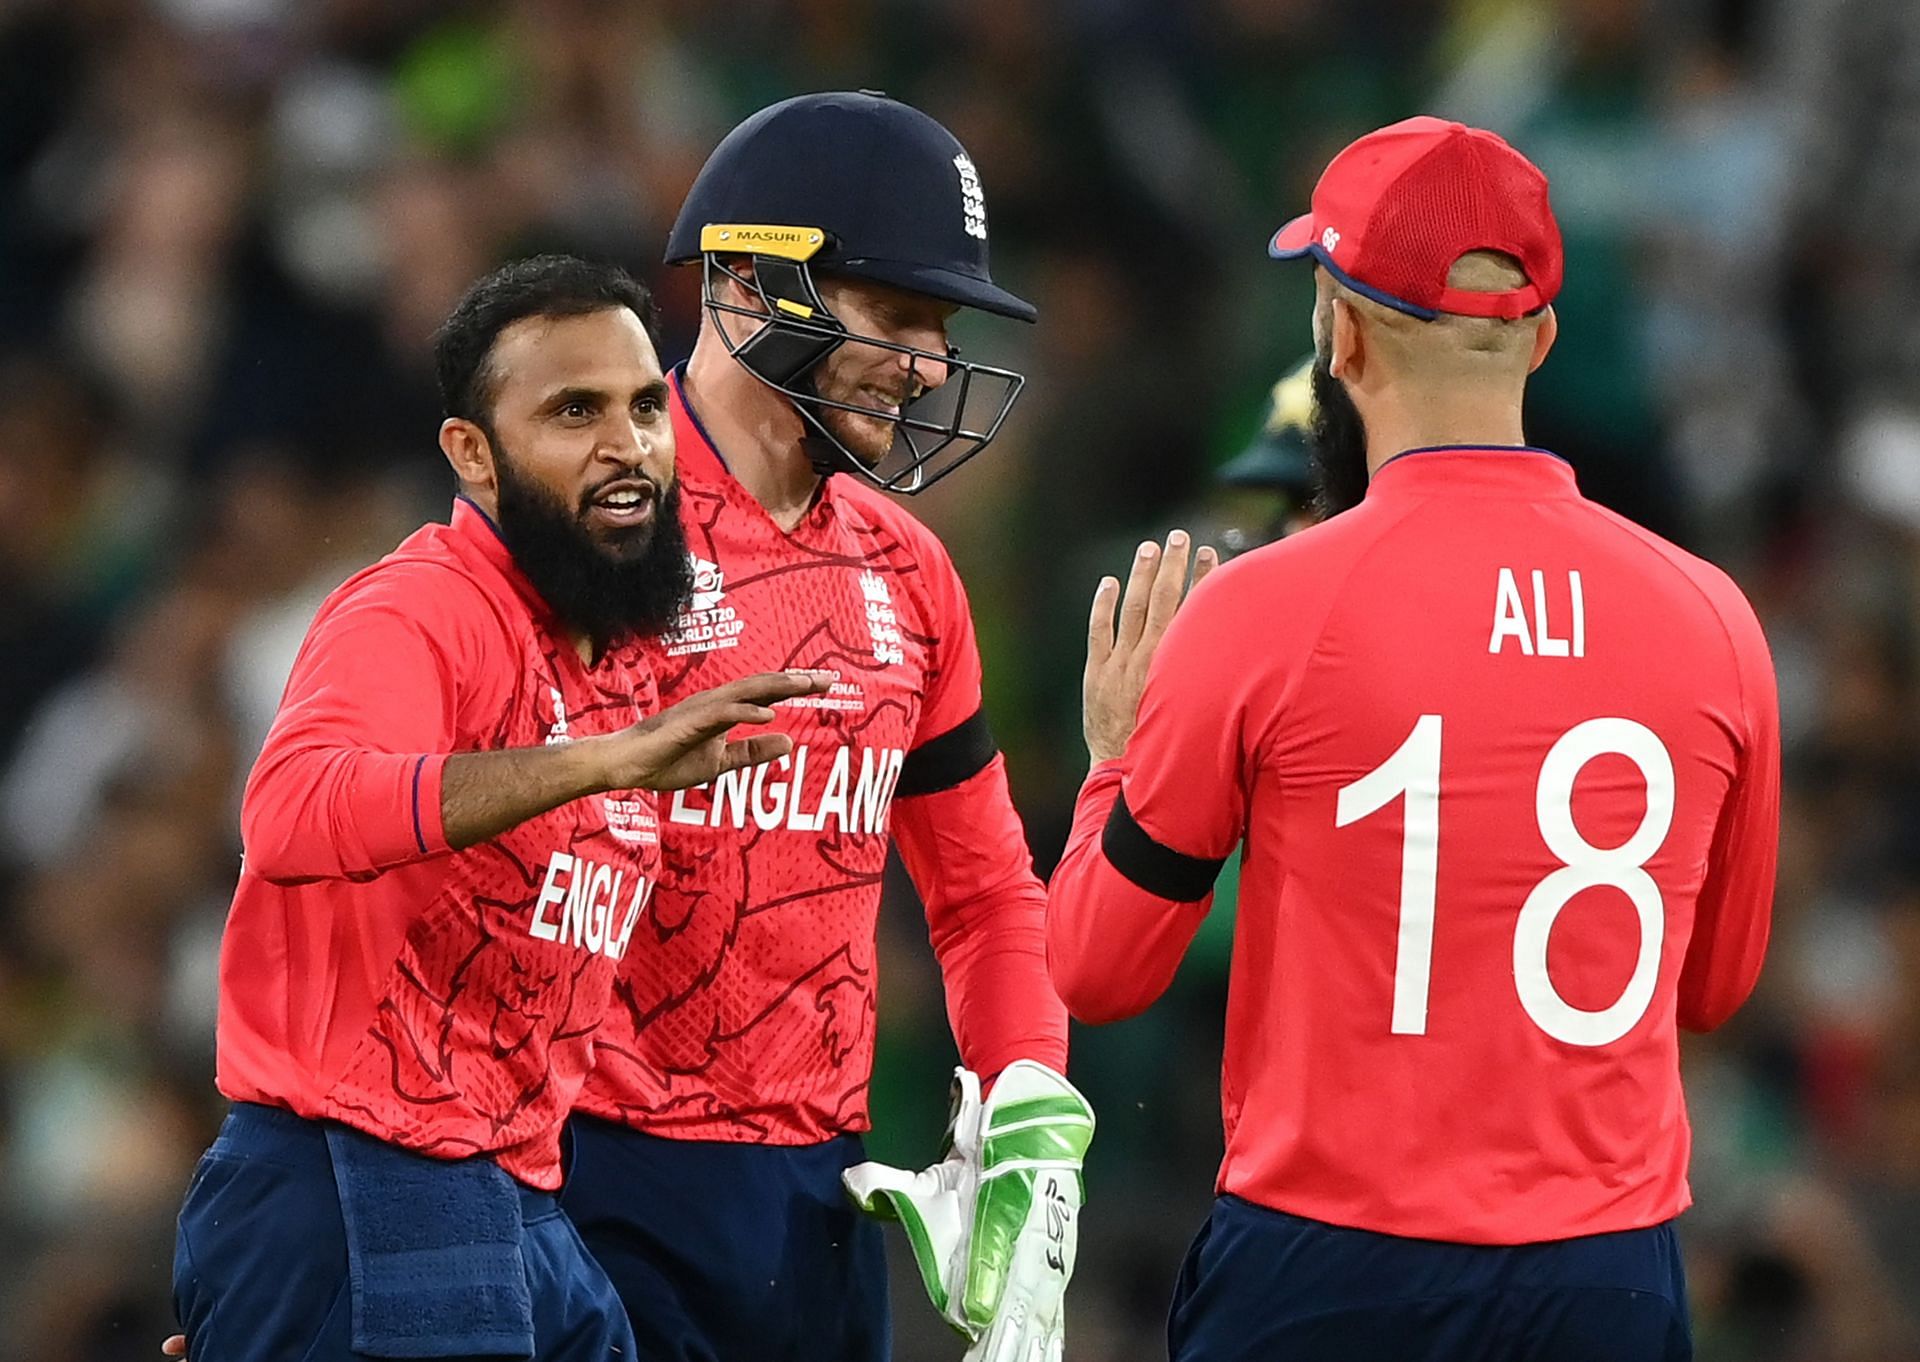 Adil Rashid opted for different bowling approach in the T20 World Cup 2022 (Image: Getty)